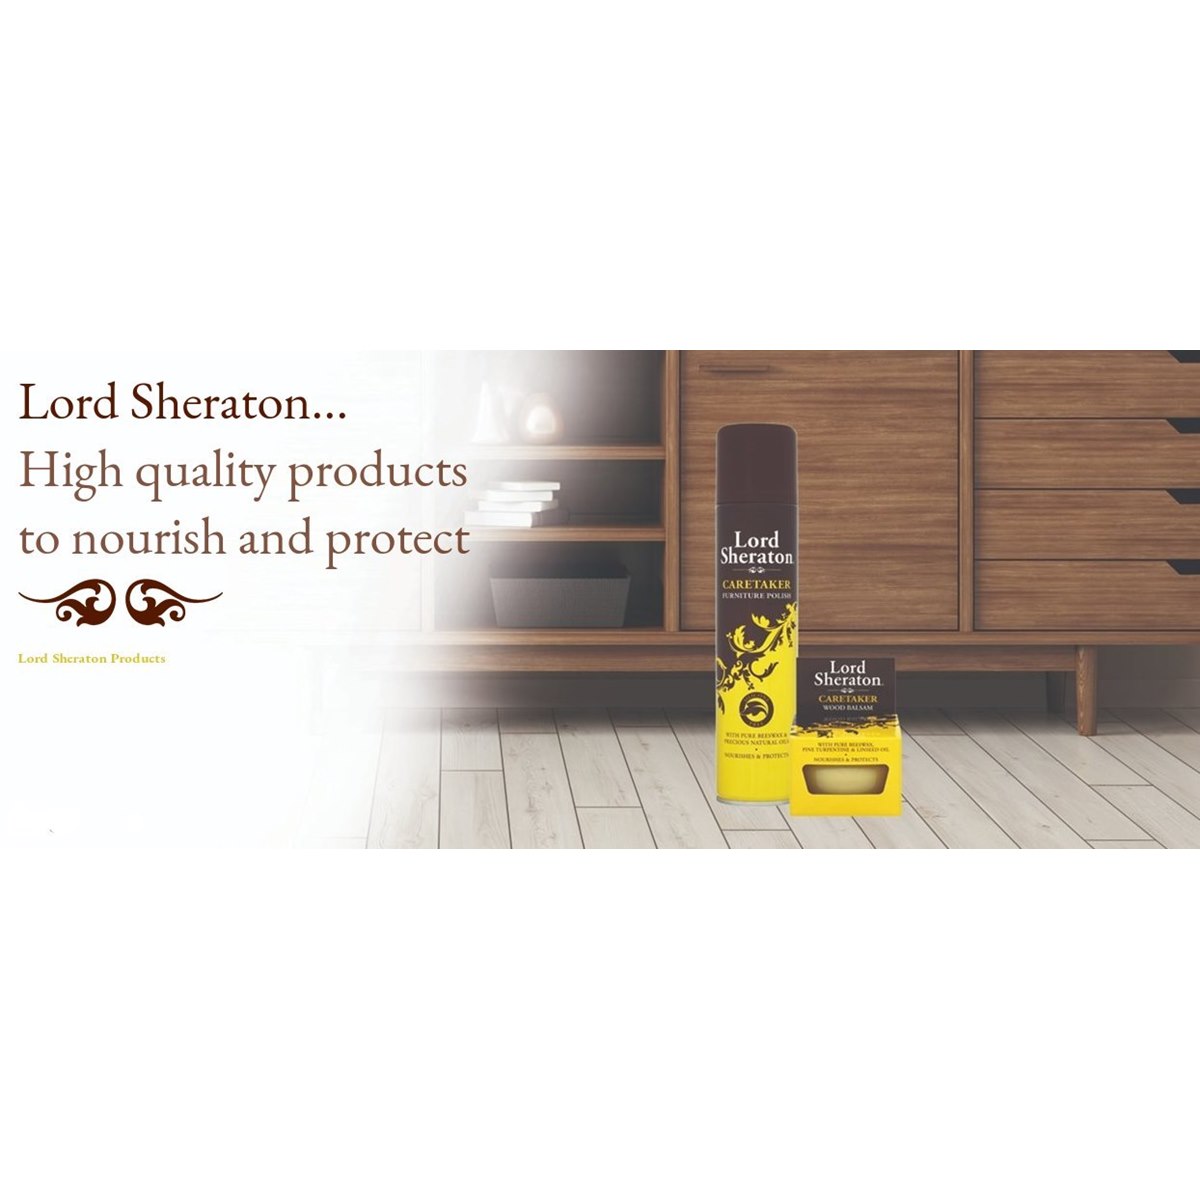 Lord Sheraton Products